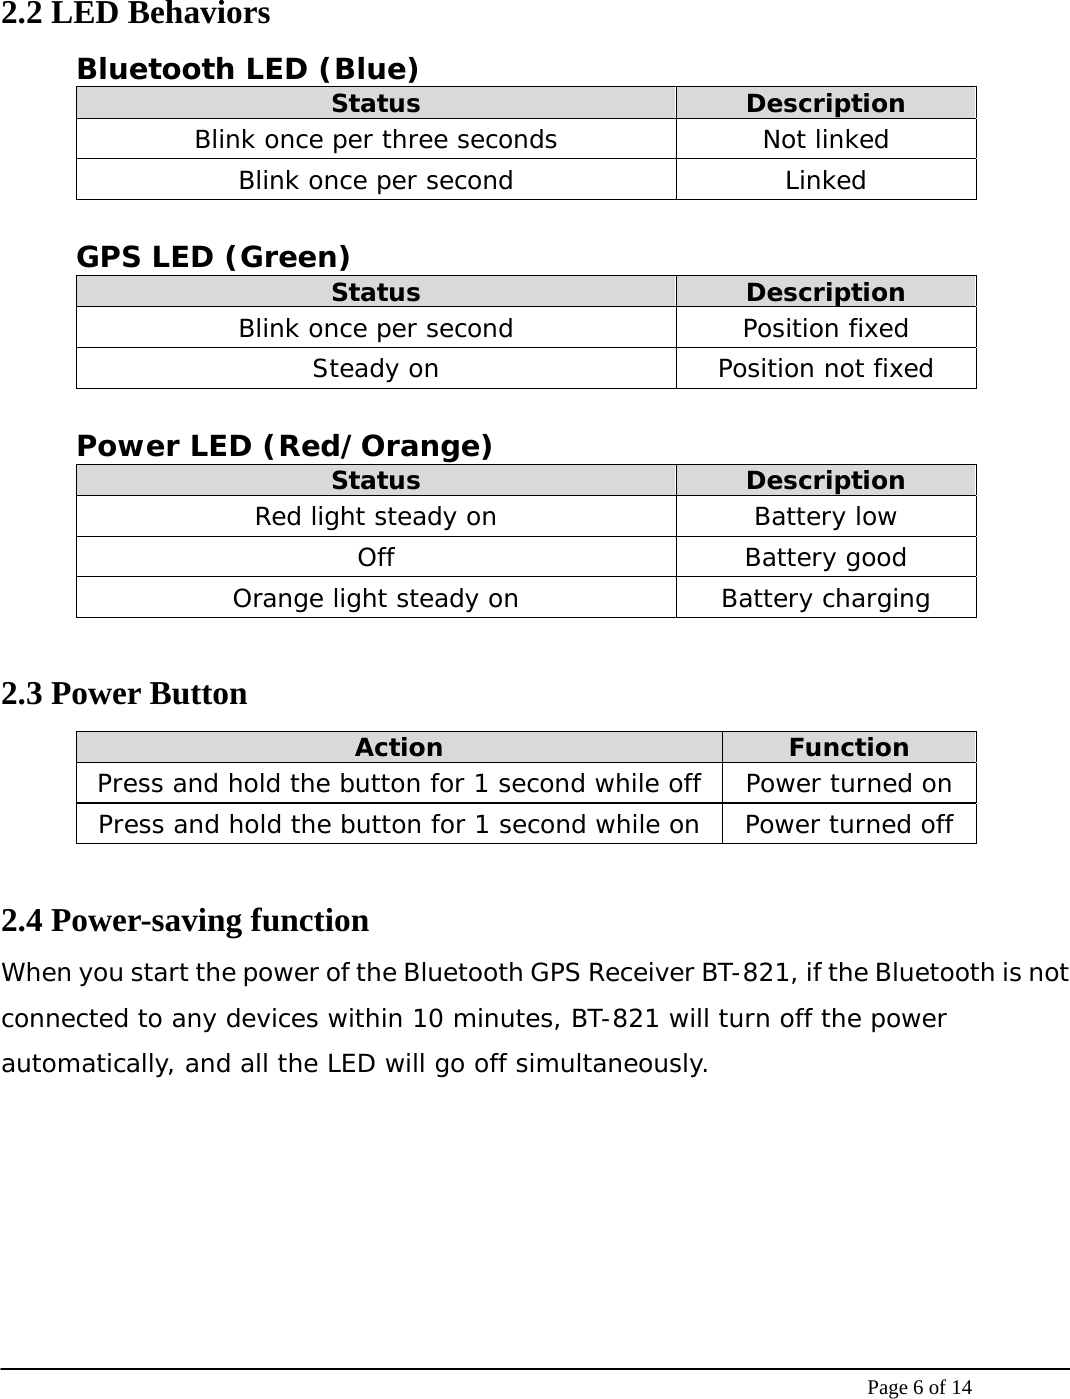    Page 6 of 14  2.2 LED Behaviors Bluetooth LED (Blue) Status  Description Blink once per three seconds  Not linked Blink once per second  Linked  GPS LED (Green) Status  Description Blink once per second  Position fixed Steady on  Position not fixed  Power LED (Red/Orange) Status  Description Red light steady on  Battery low Off Battery good Orange light steady on  Battery charging  2.3 Power Button Action  Function Press and hold the button for 1 second while off  Power turned on Press and hold the button for 1 second while on  Power turned off  2.4 Power-saving function When you start the power of the Bluetooth GPS Receiver BT-821, if the Bluetooth is not connected to any devices within 10 minutes, BT-821 will turn off the power automatically, and all the LED will go off simultaneously.   